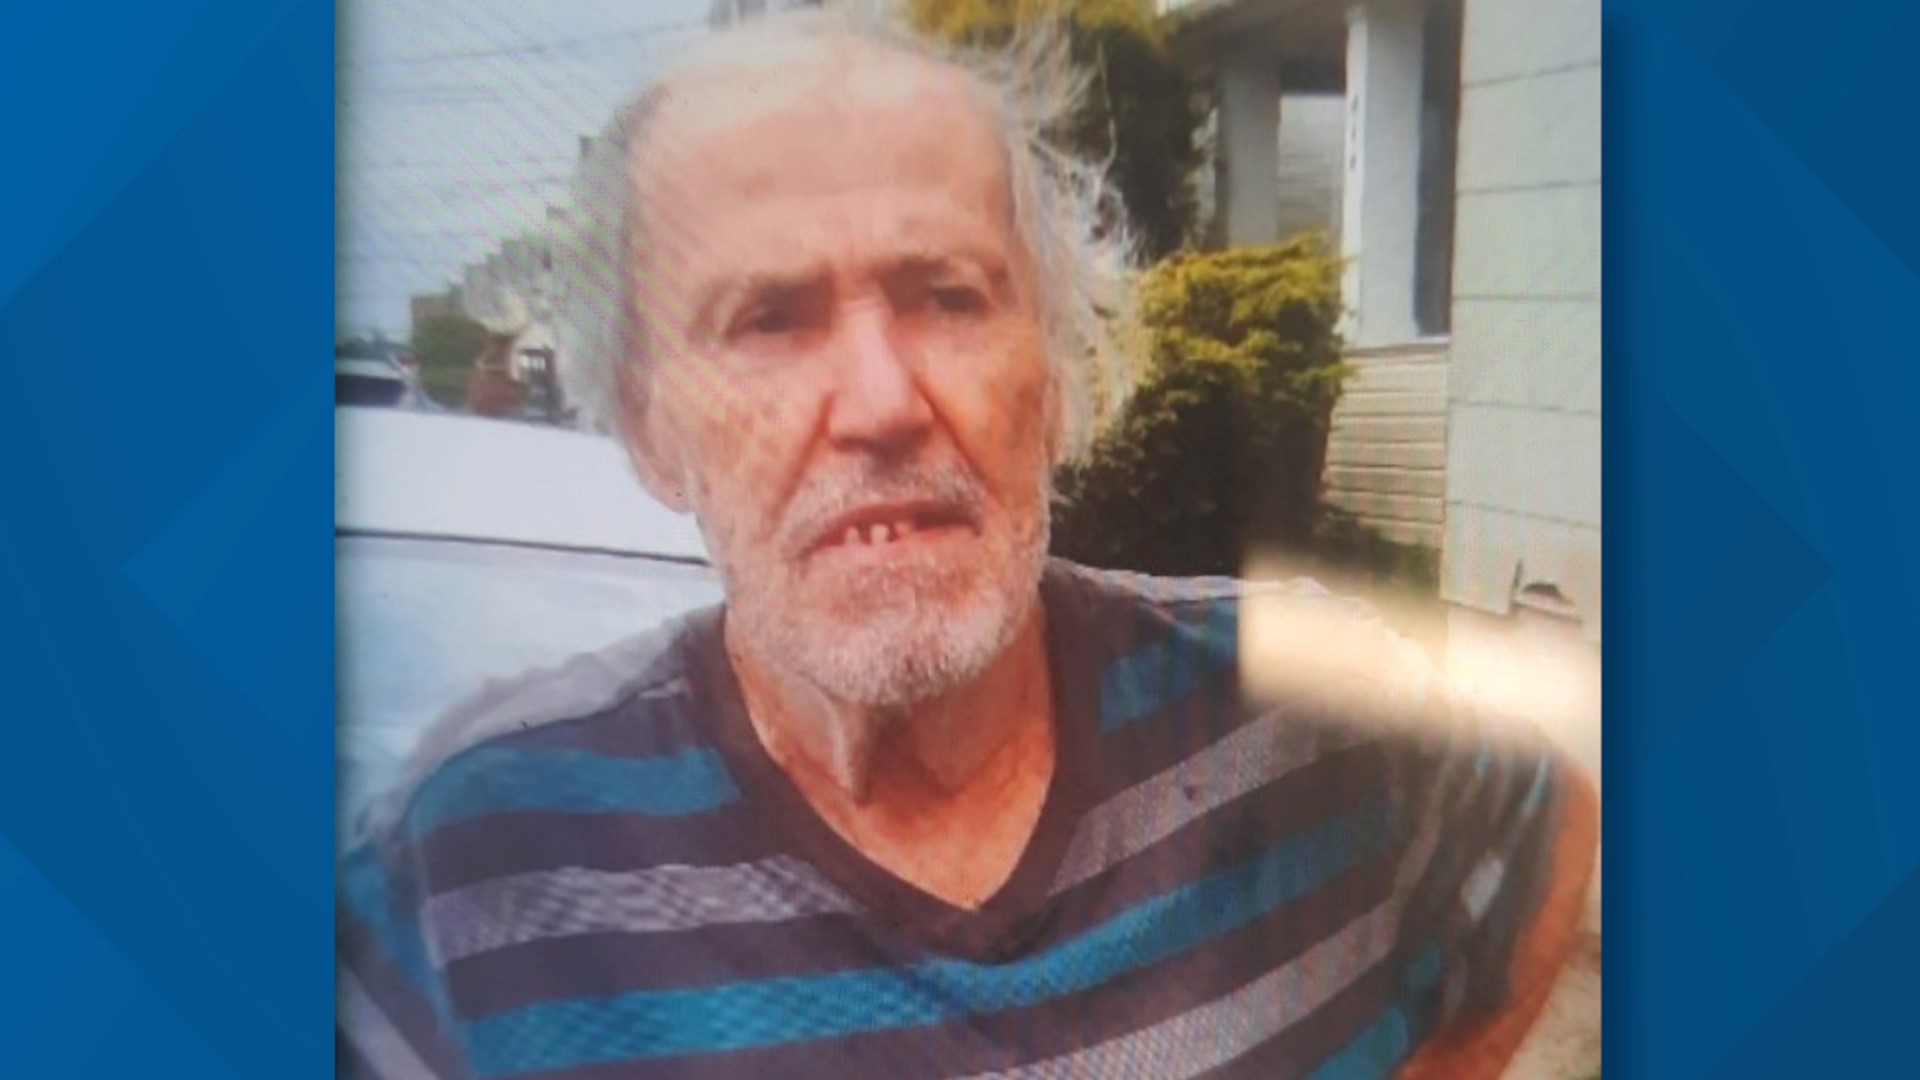 Ronald Burns, 72 years old, from Freeland has been missing since May.